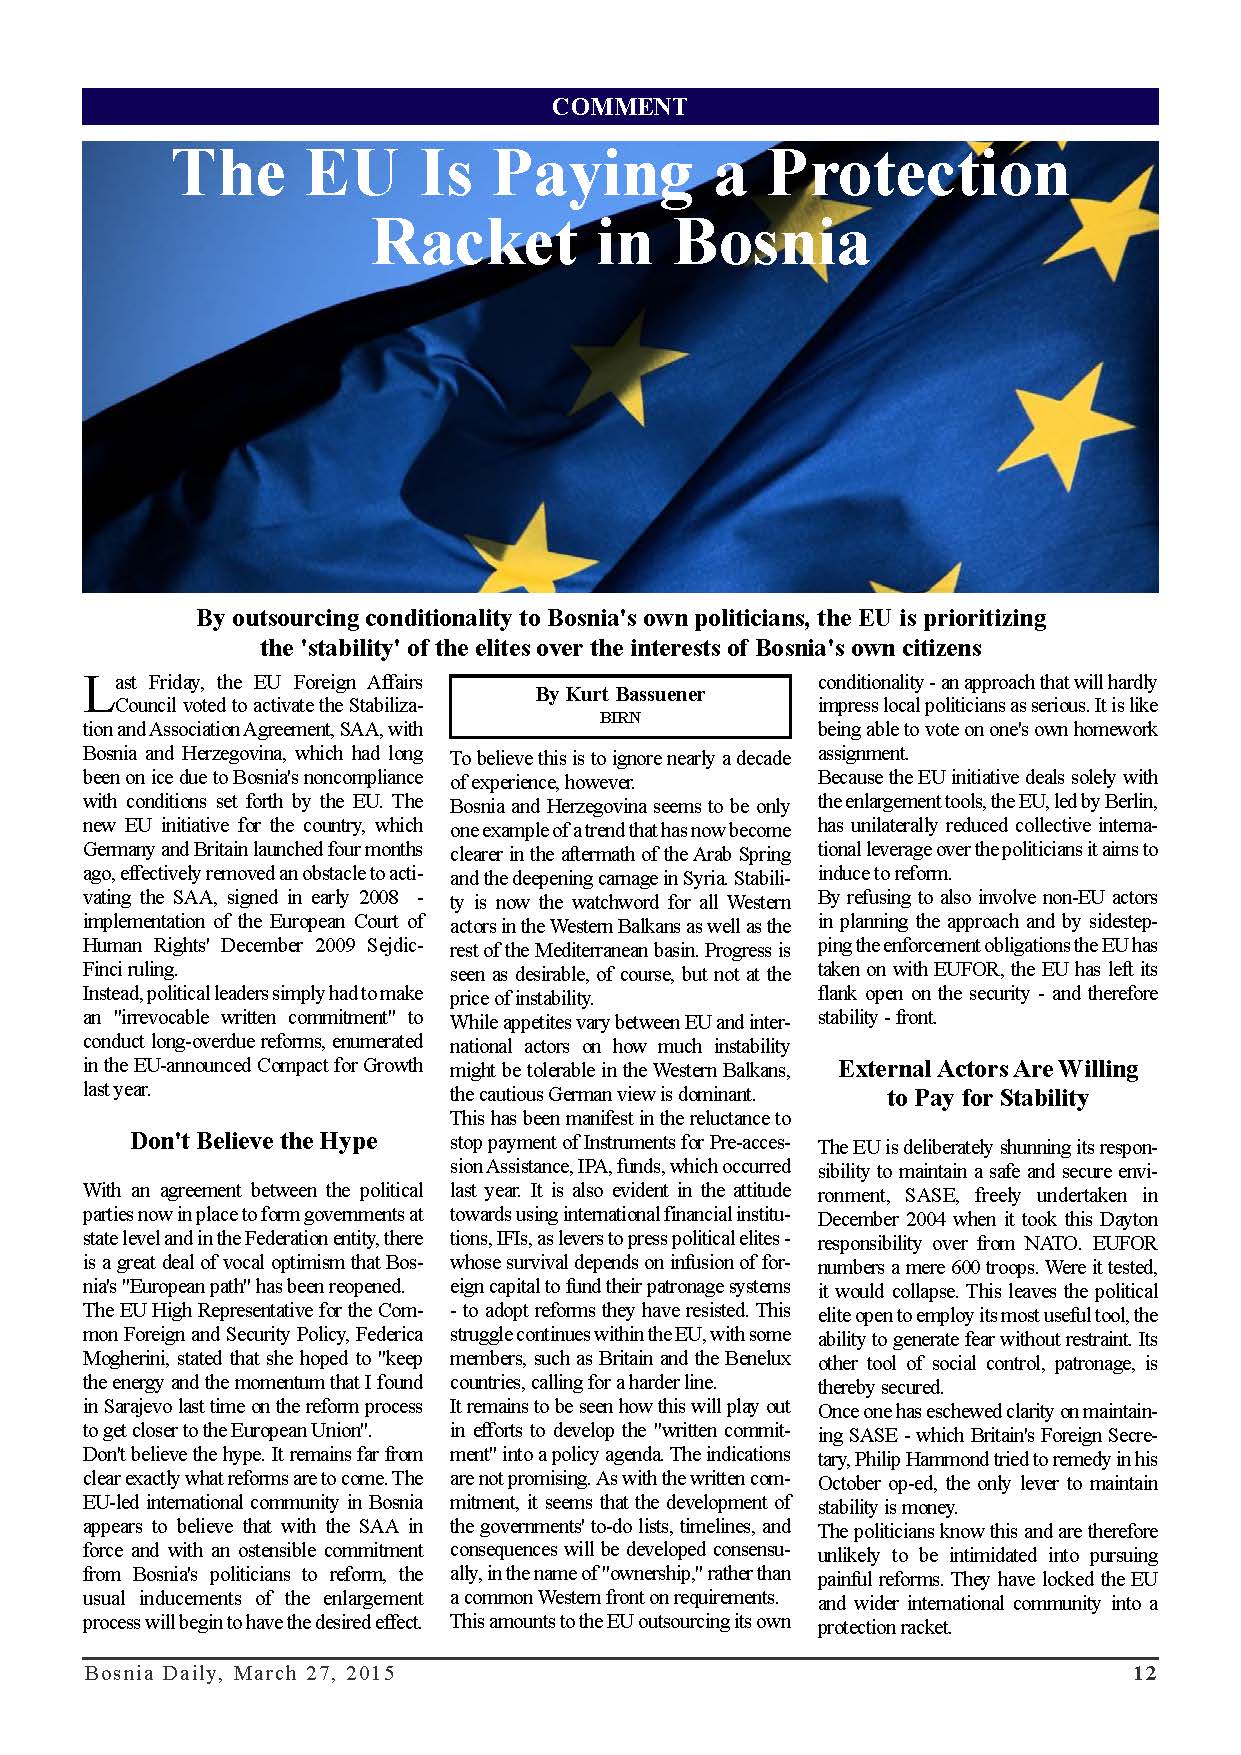 DPC BOSNIA DAILY: The EU Is Paying a Protection Racket in Bosnia Cover Image